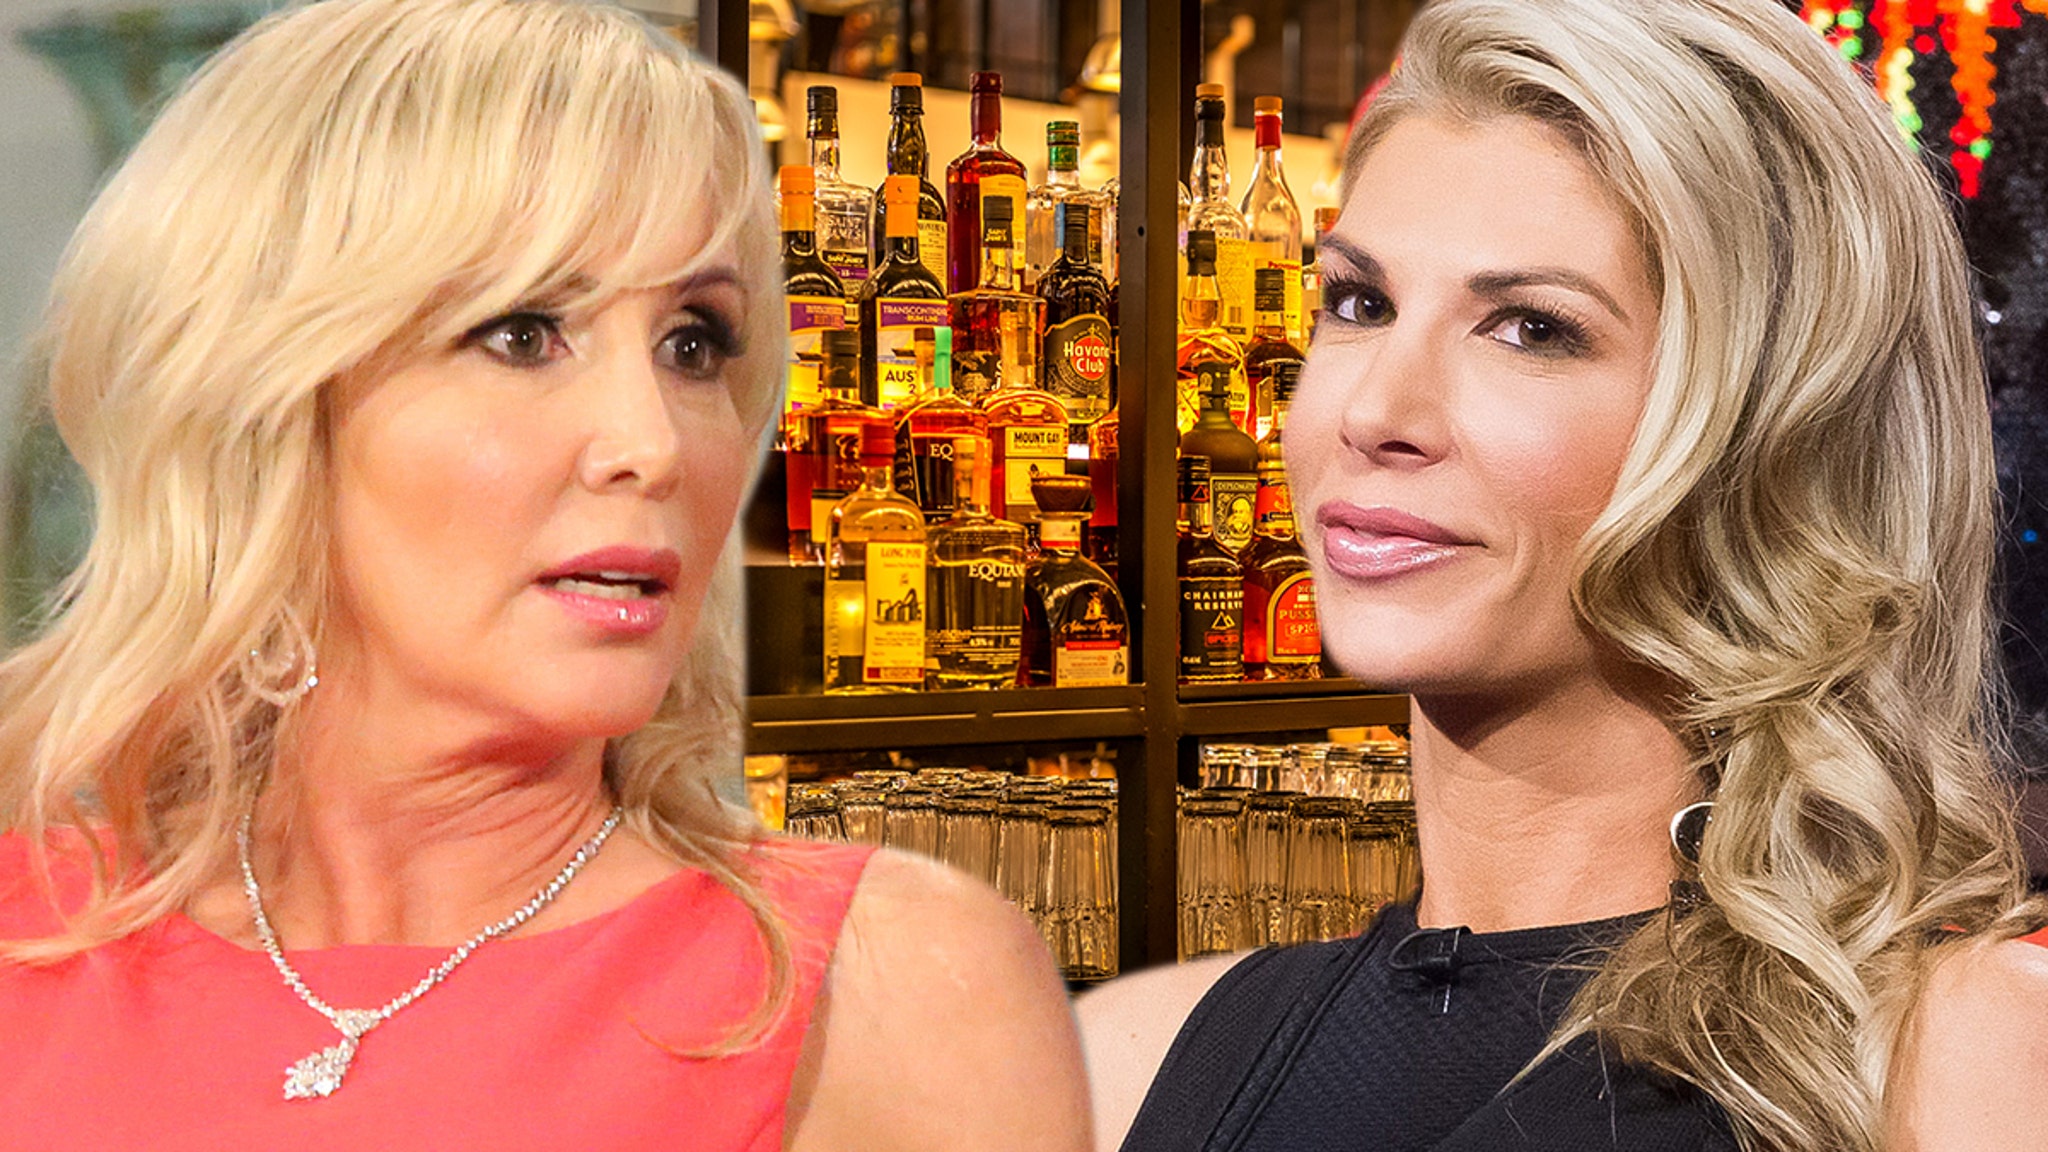 Shannon Beador Allegedly Tipsy at Bar Before Arrest, ‘Bitching’ About Alexis Bellino